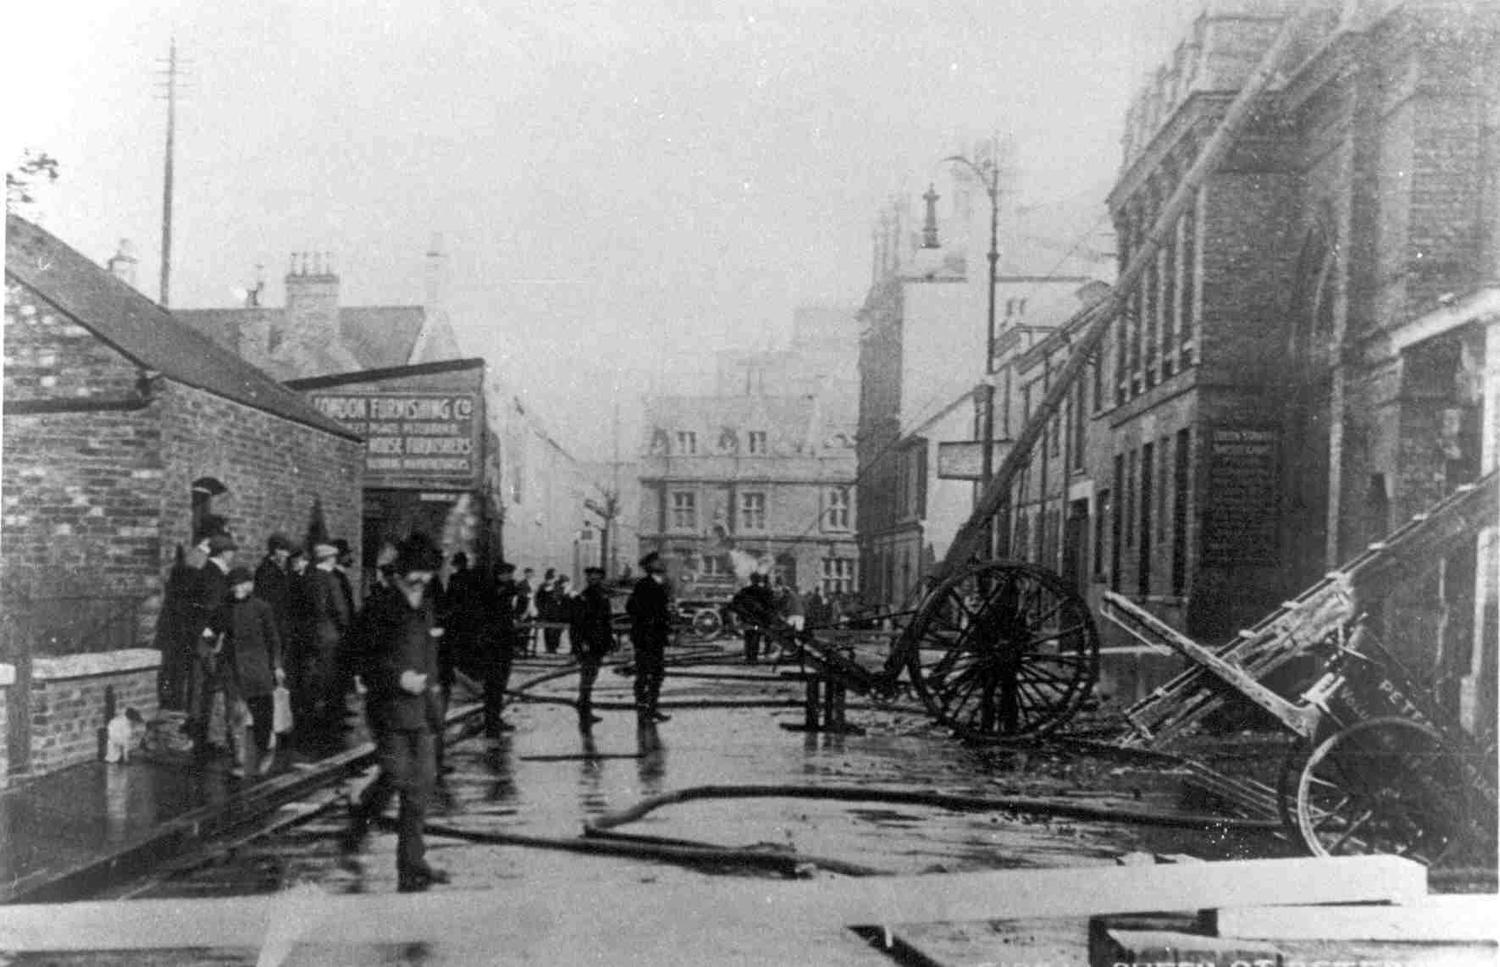 Peterborough City and Volunteer Fire Brigades at the scene of the Queens Street Baptist Chapel Fire 16.10.1905